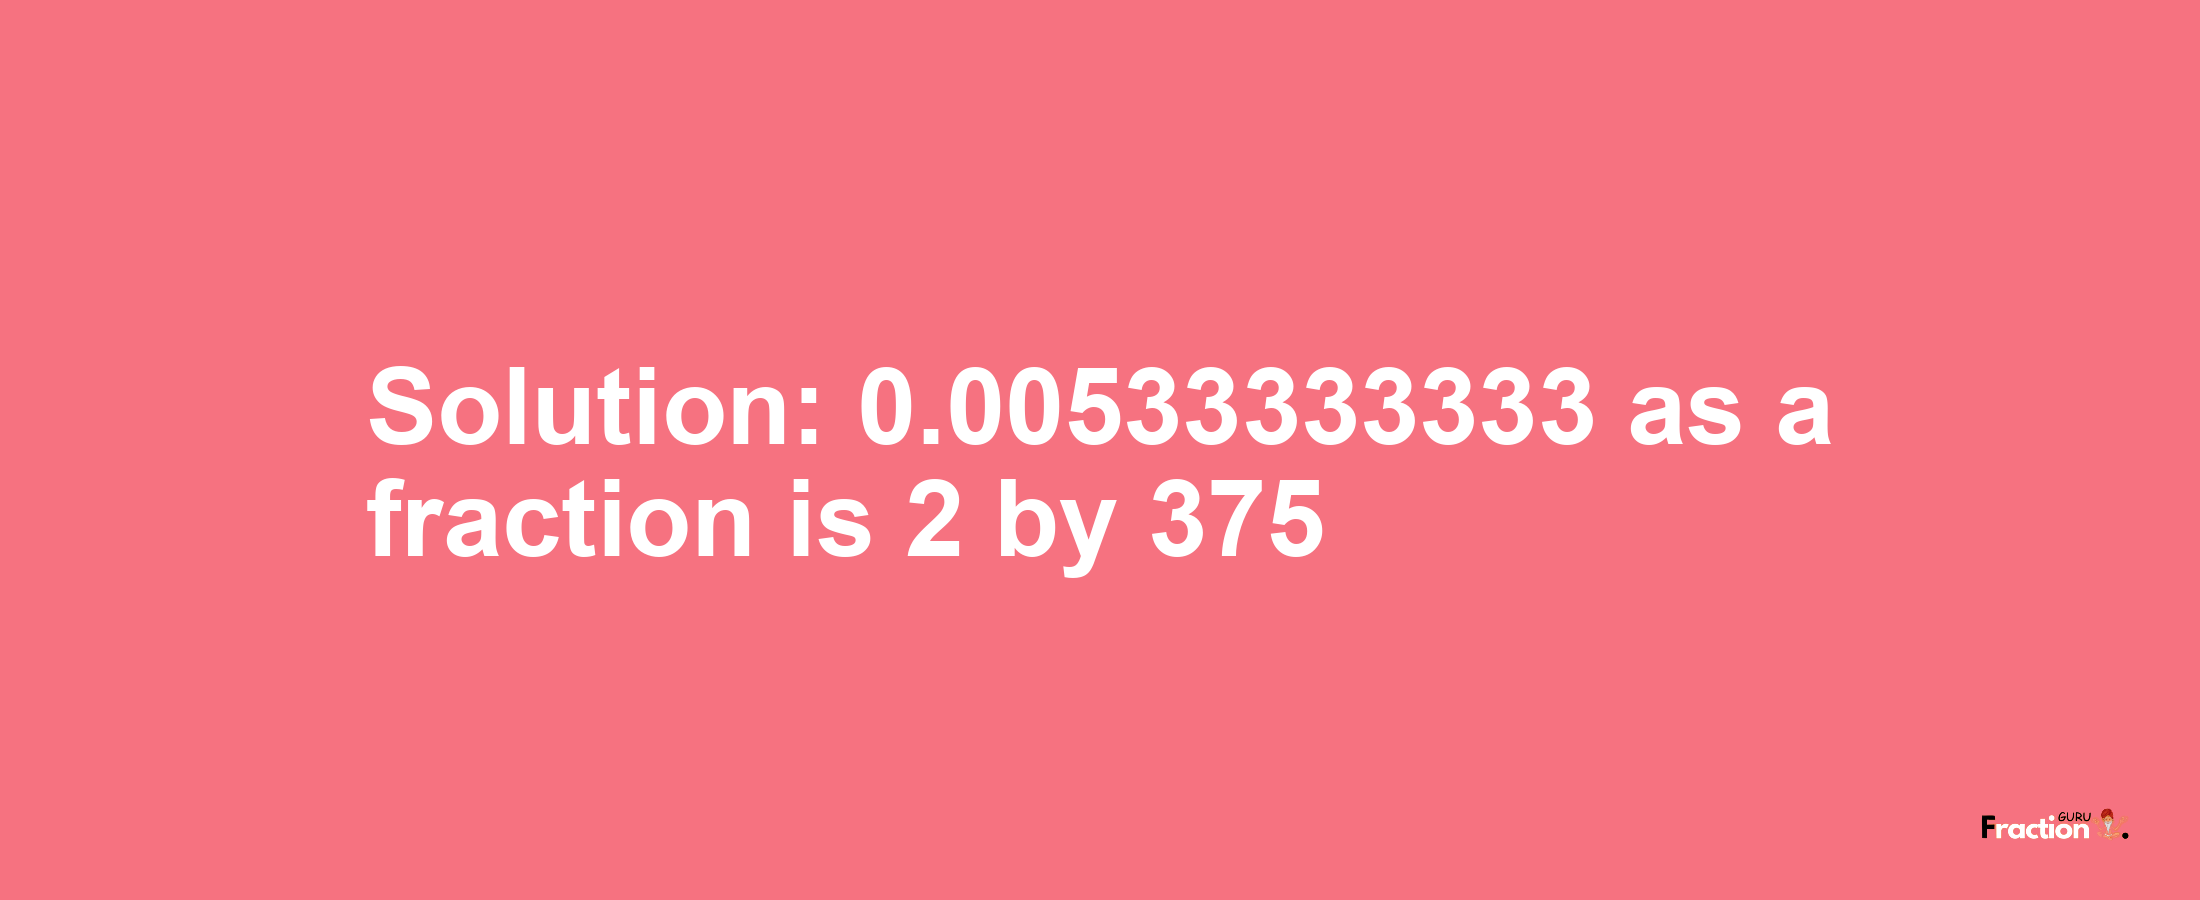 Solution:0.00533333333 as a fraction is 2/375